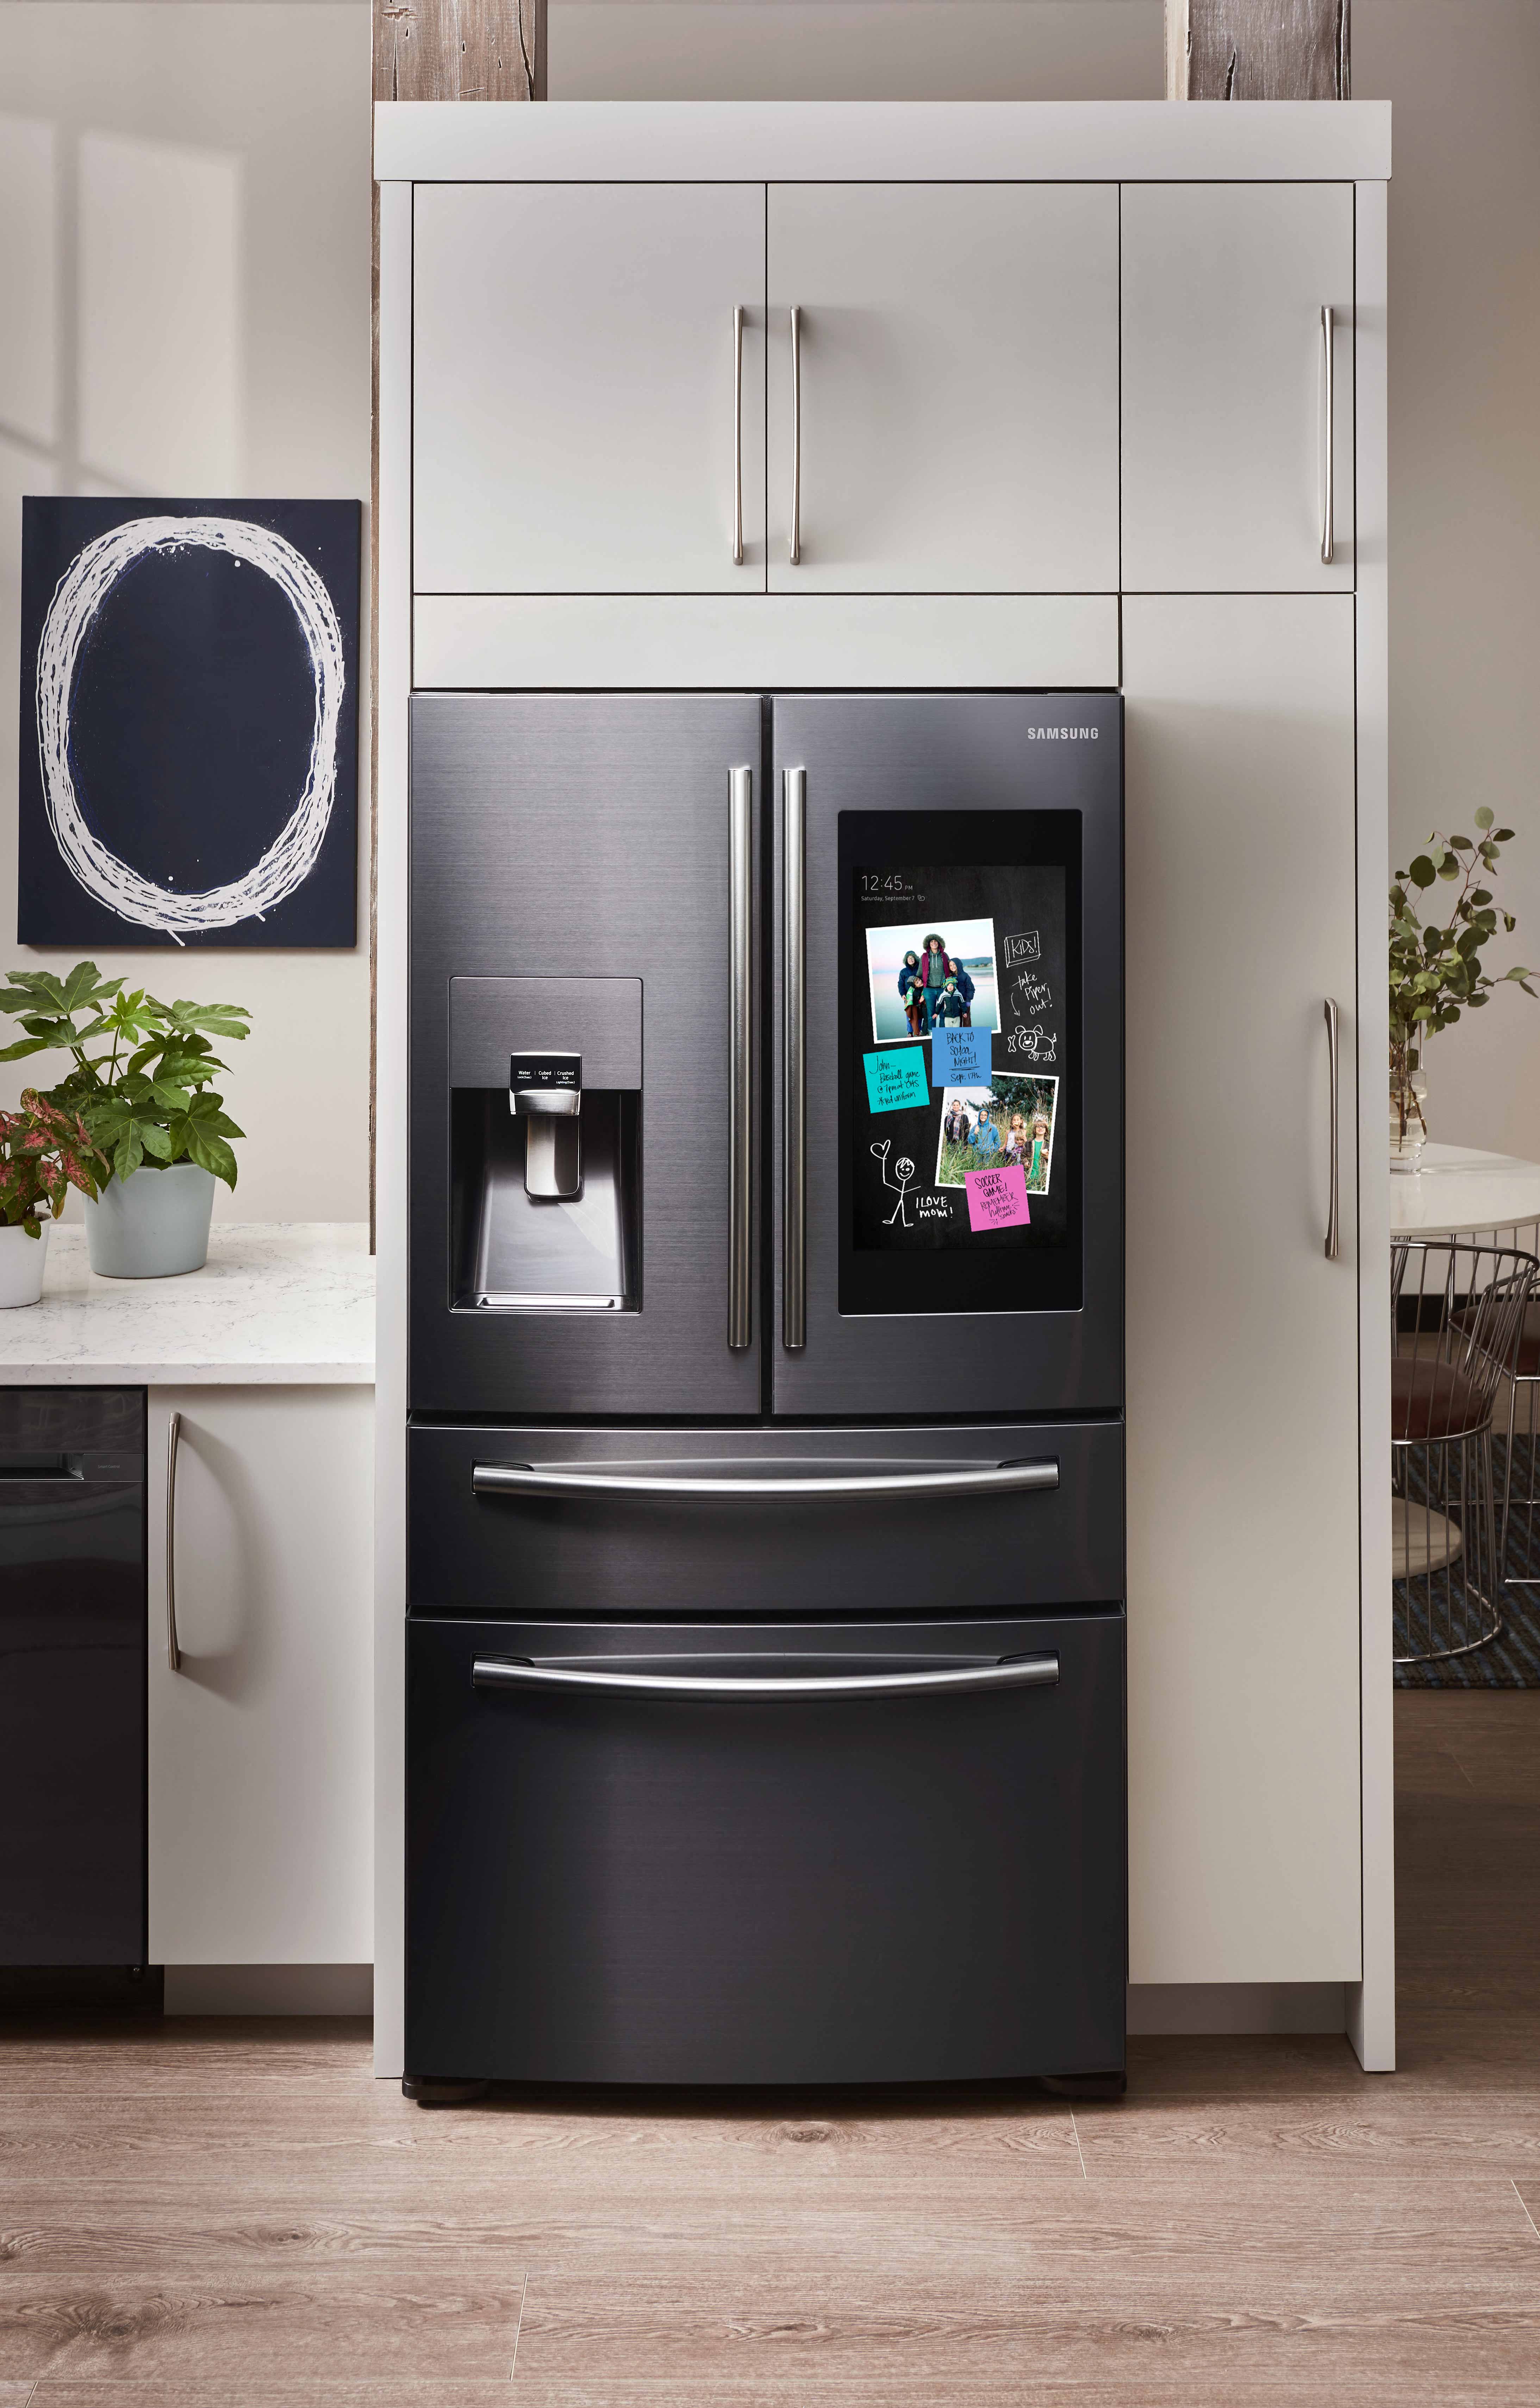 2020 Holiday Gift Guide - Home Appliance - Family Hub